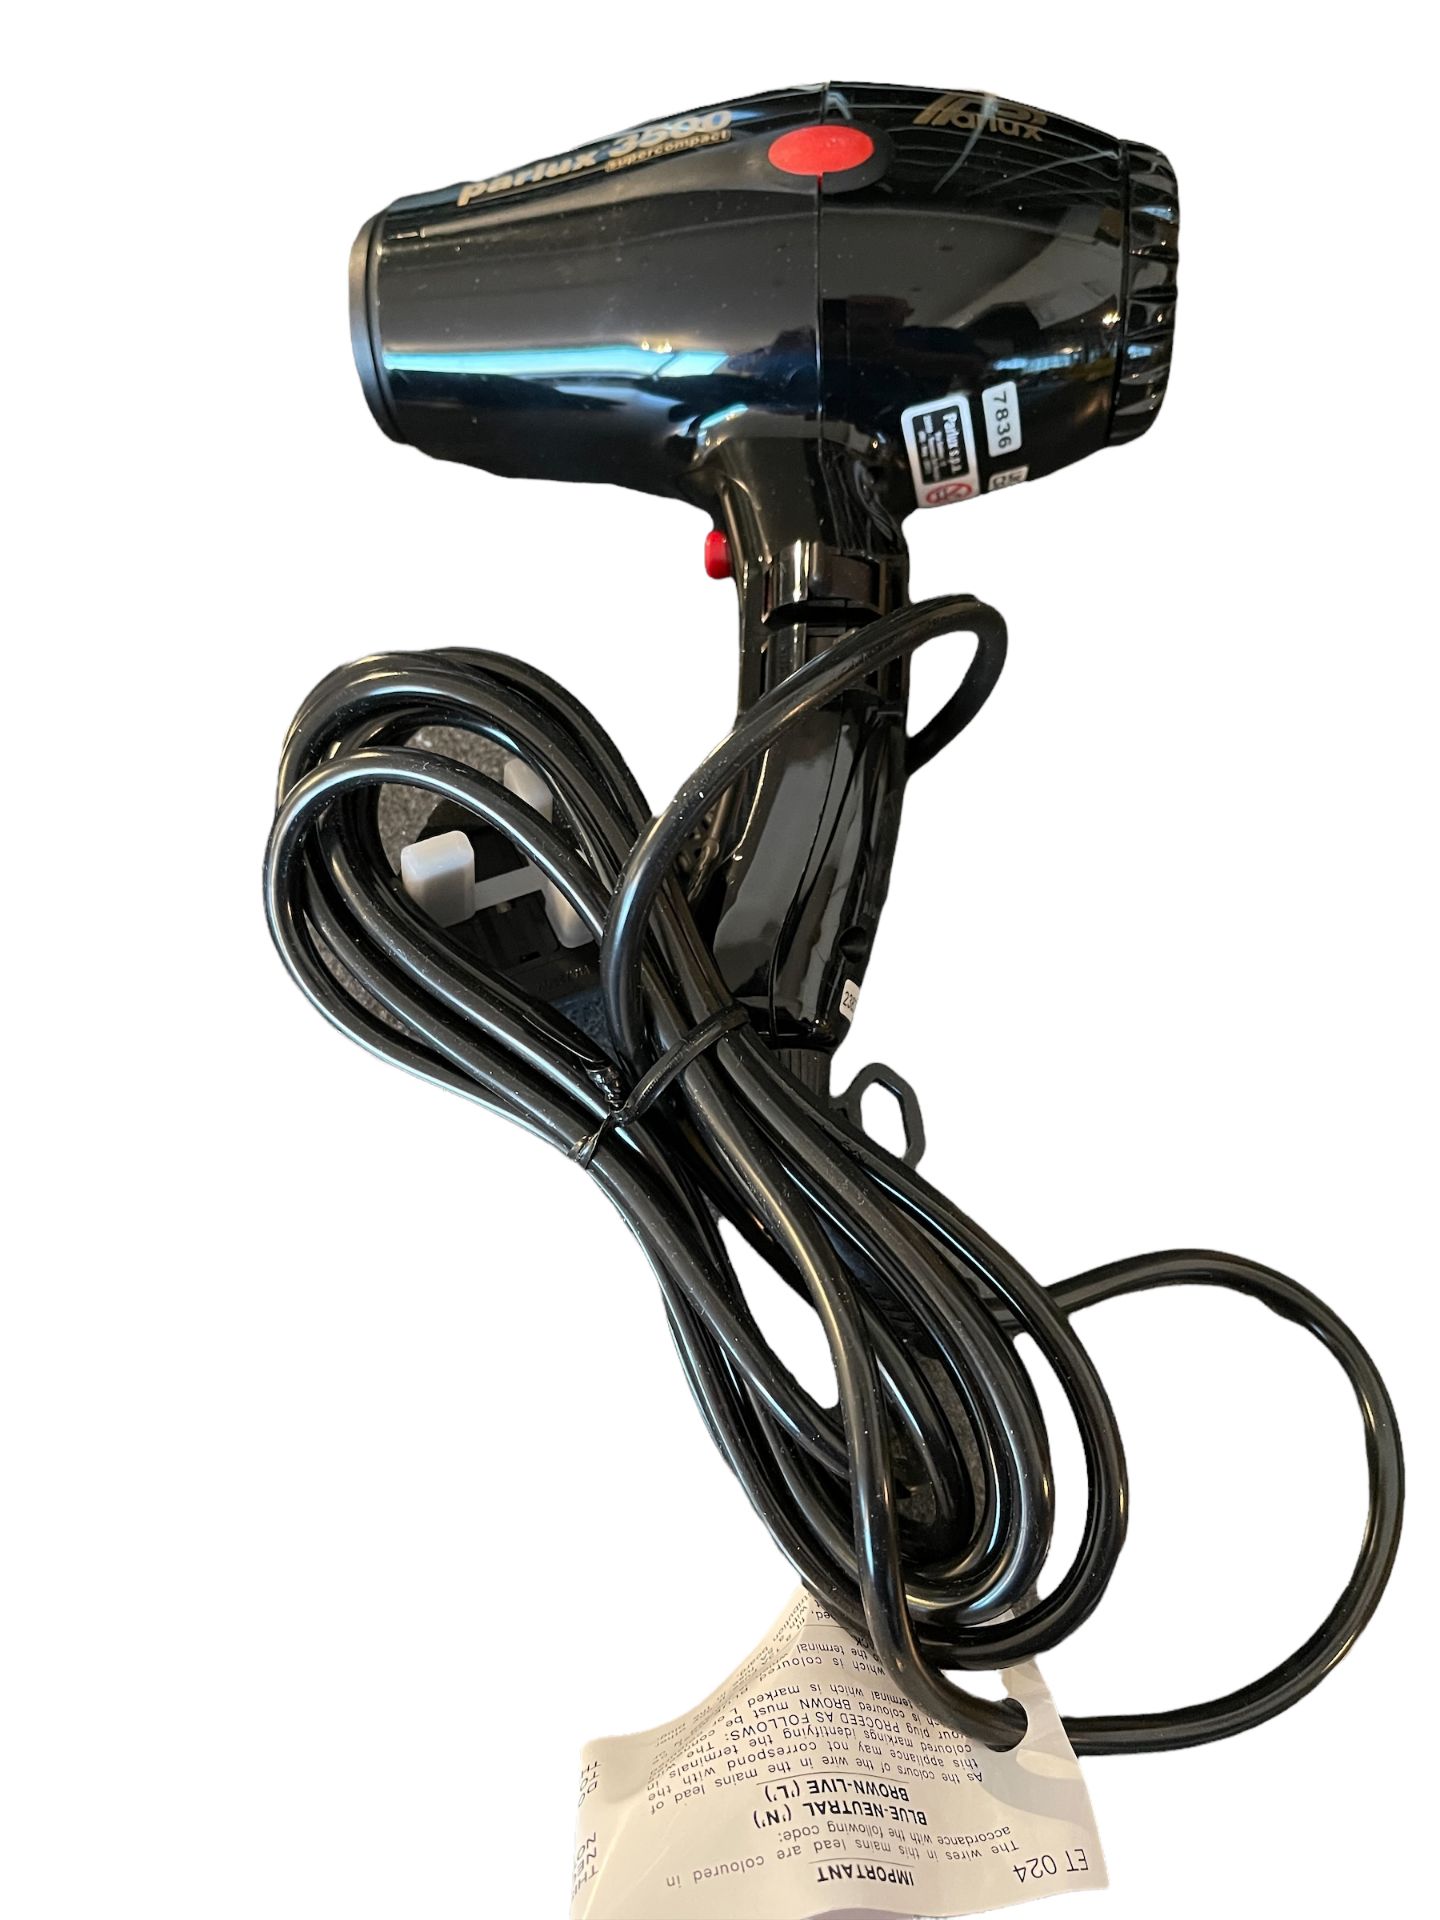 Parlux 3500 Supercompact Hair Dryer Professional Black - Image 7 of 11